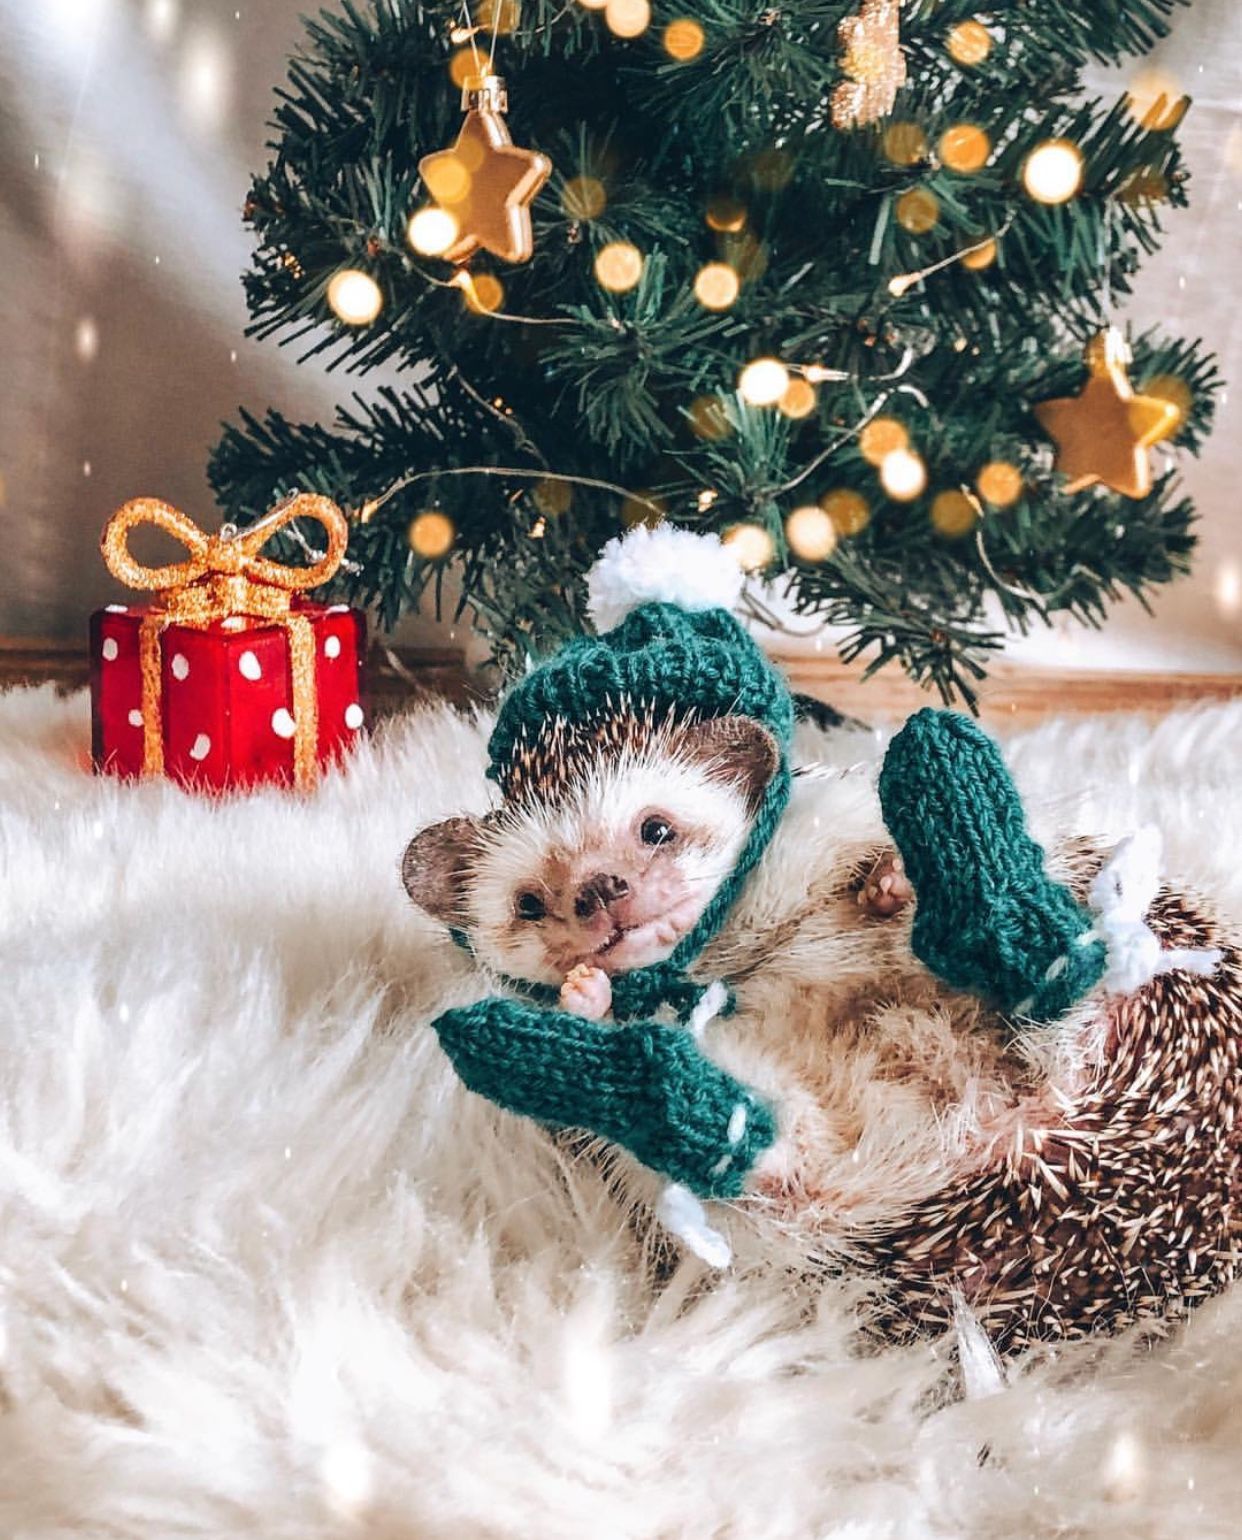 Merry Christmas from Mr. Pokee. Cute animals, Cute hedgehog, Cute creatures